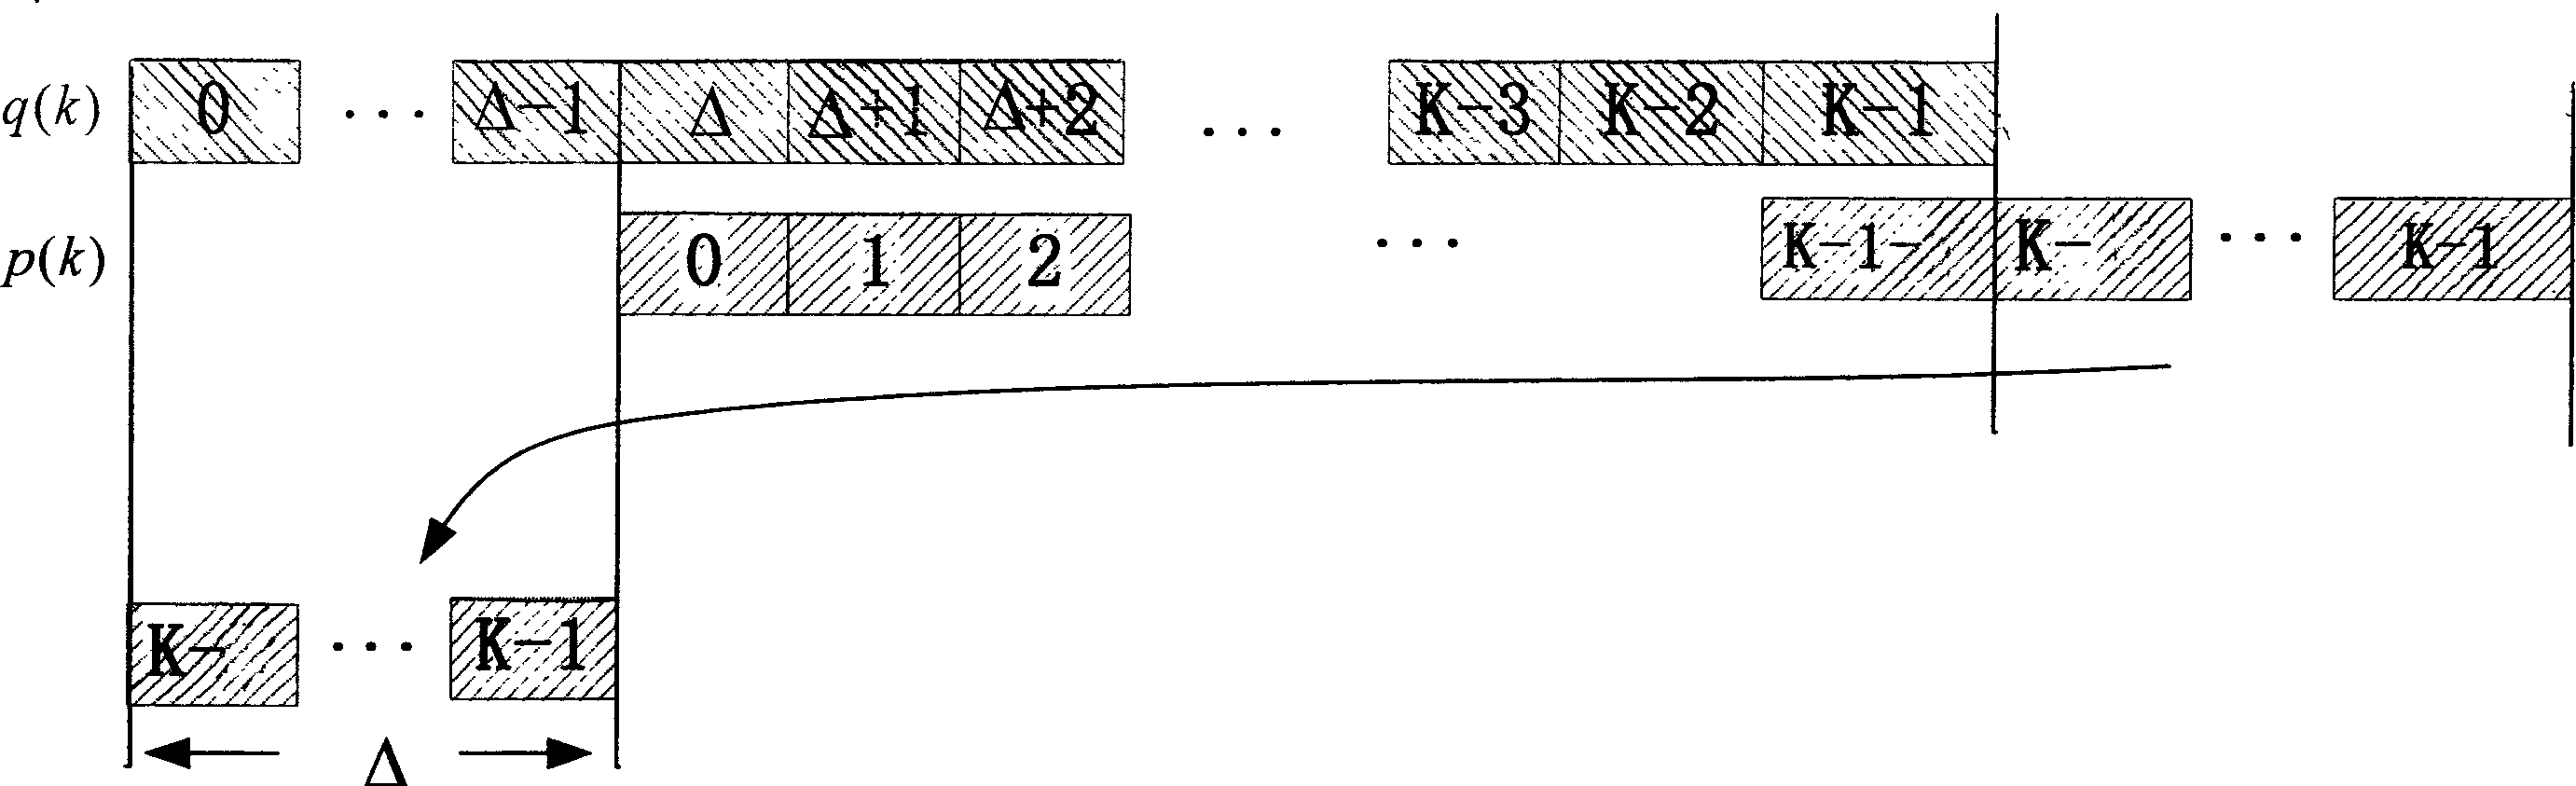 Filtering method for channel estimation in CDMA timing tracking system